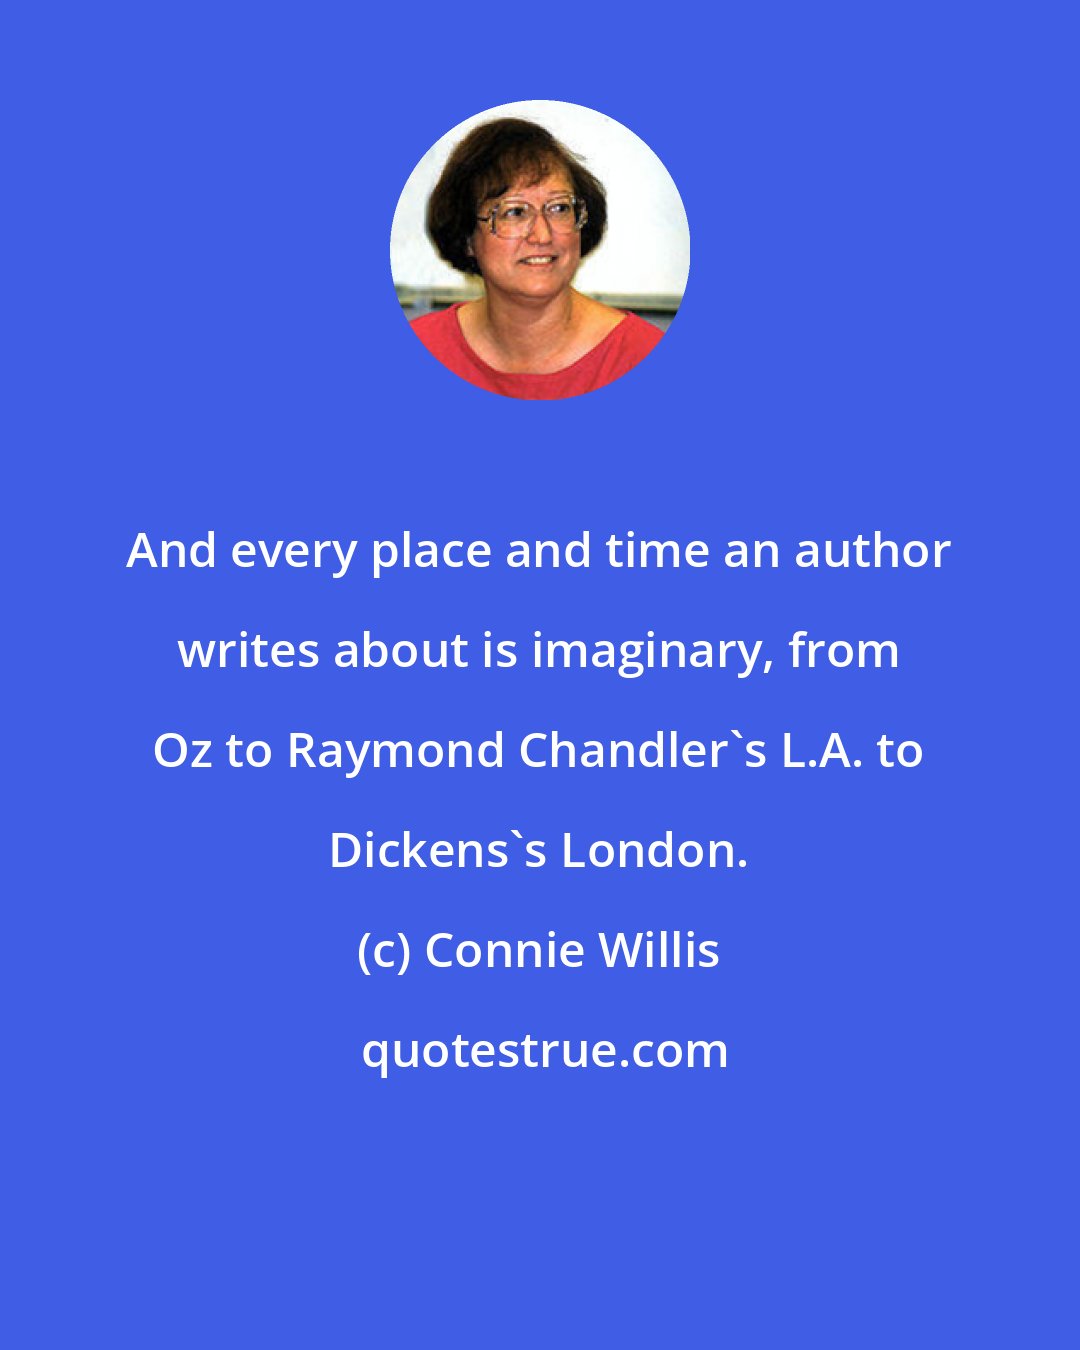 Connie Willis: And every place and time an author writes about is imaginary, from Oz to Raymond Chandler's L.A. to Dickens's London.